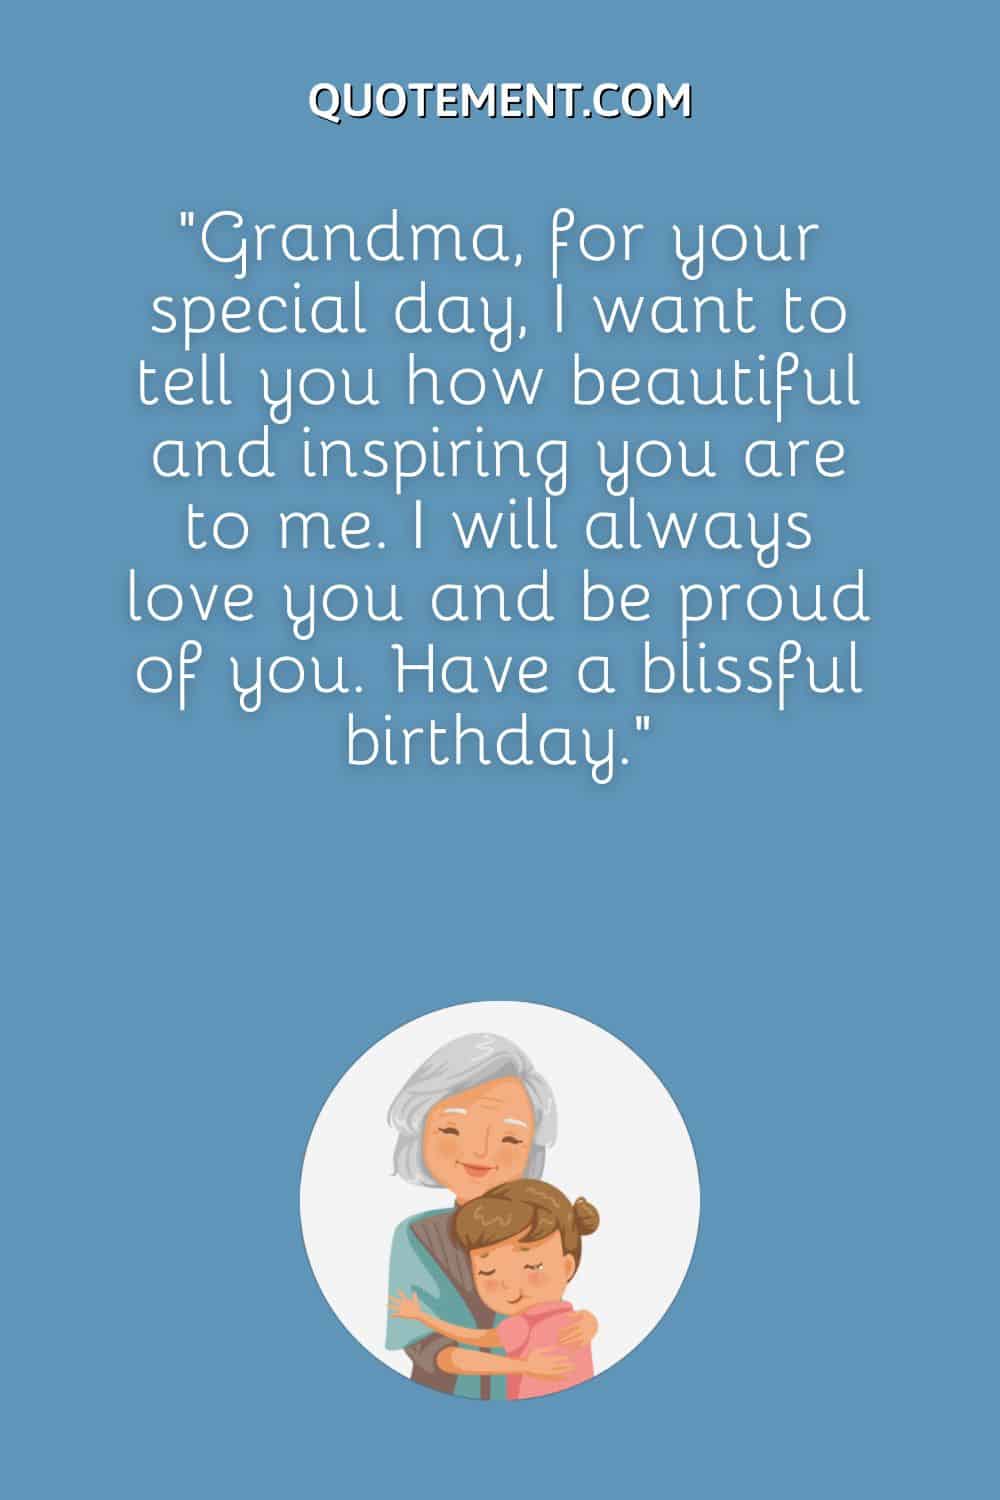 Grandma, for your special day, I want to tell you how beautiful and inspiring you are to me